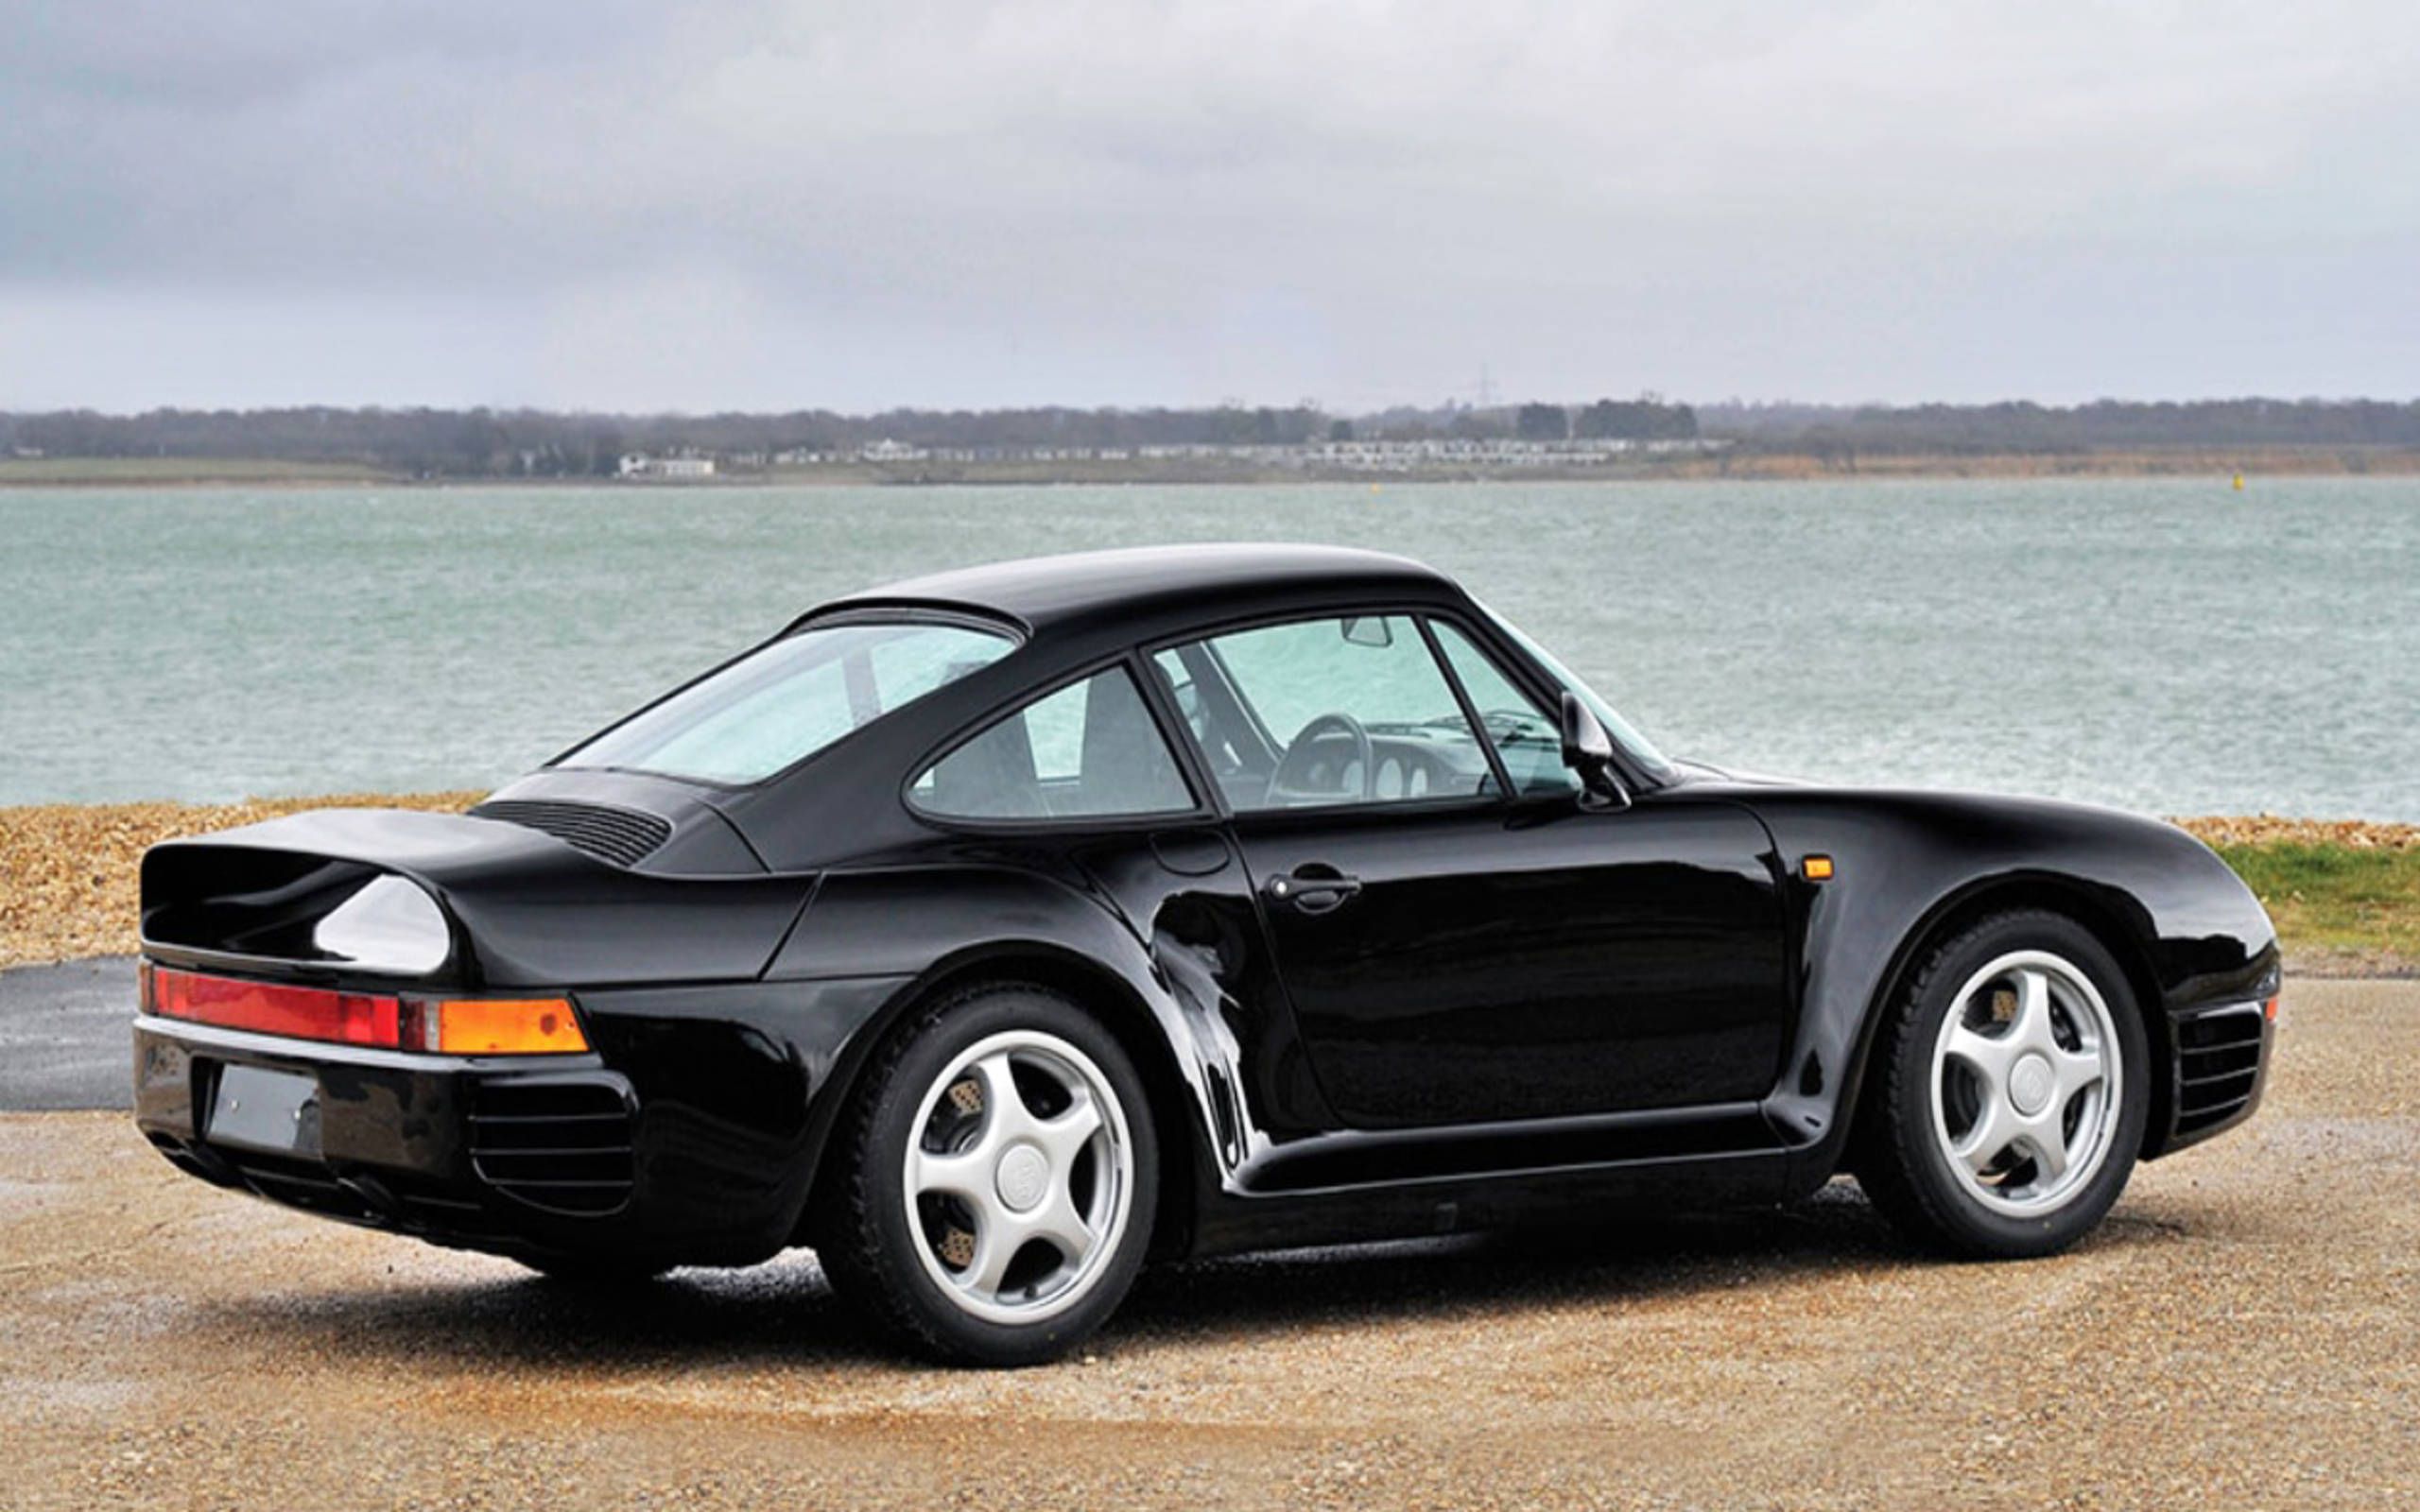 Is this low-mile Porsche 959 about to set a record price at auction?